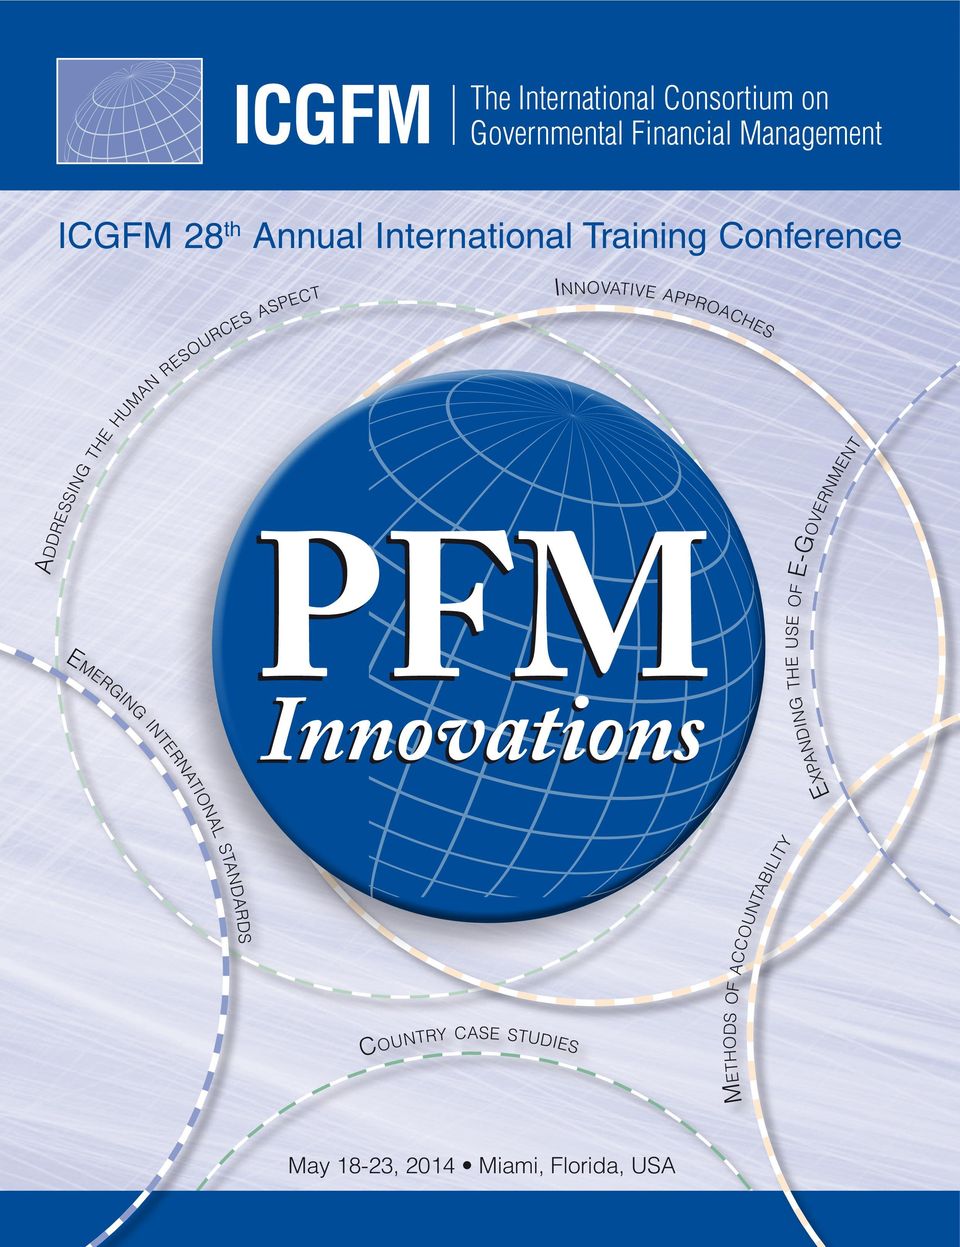 Innovative approaches PFM Innovations Expanding the use of E-Government Emerging